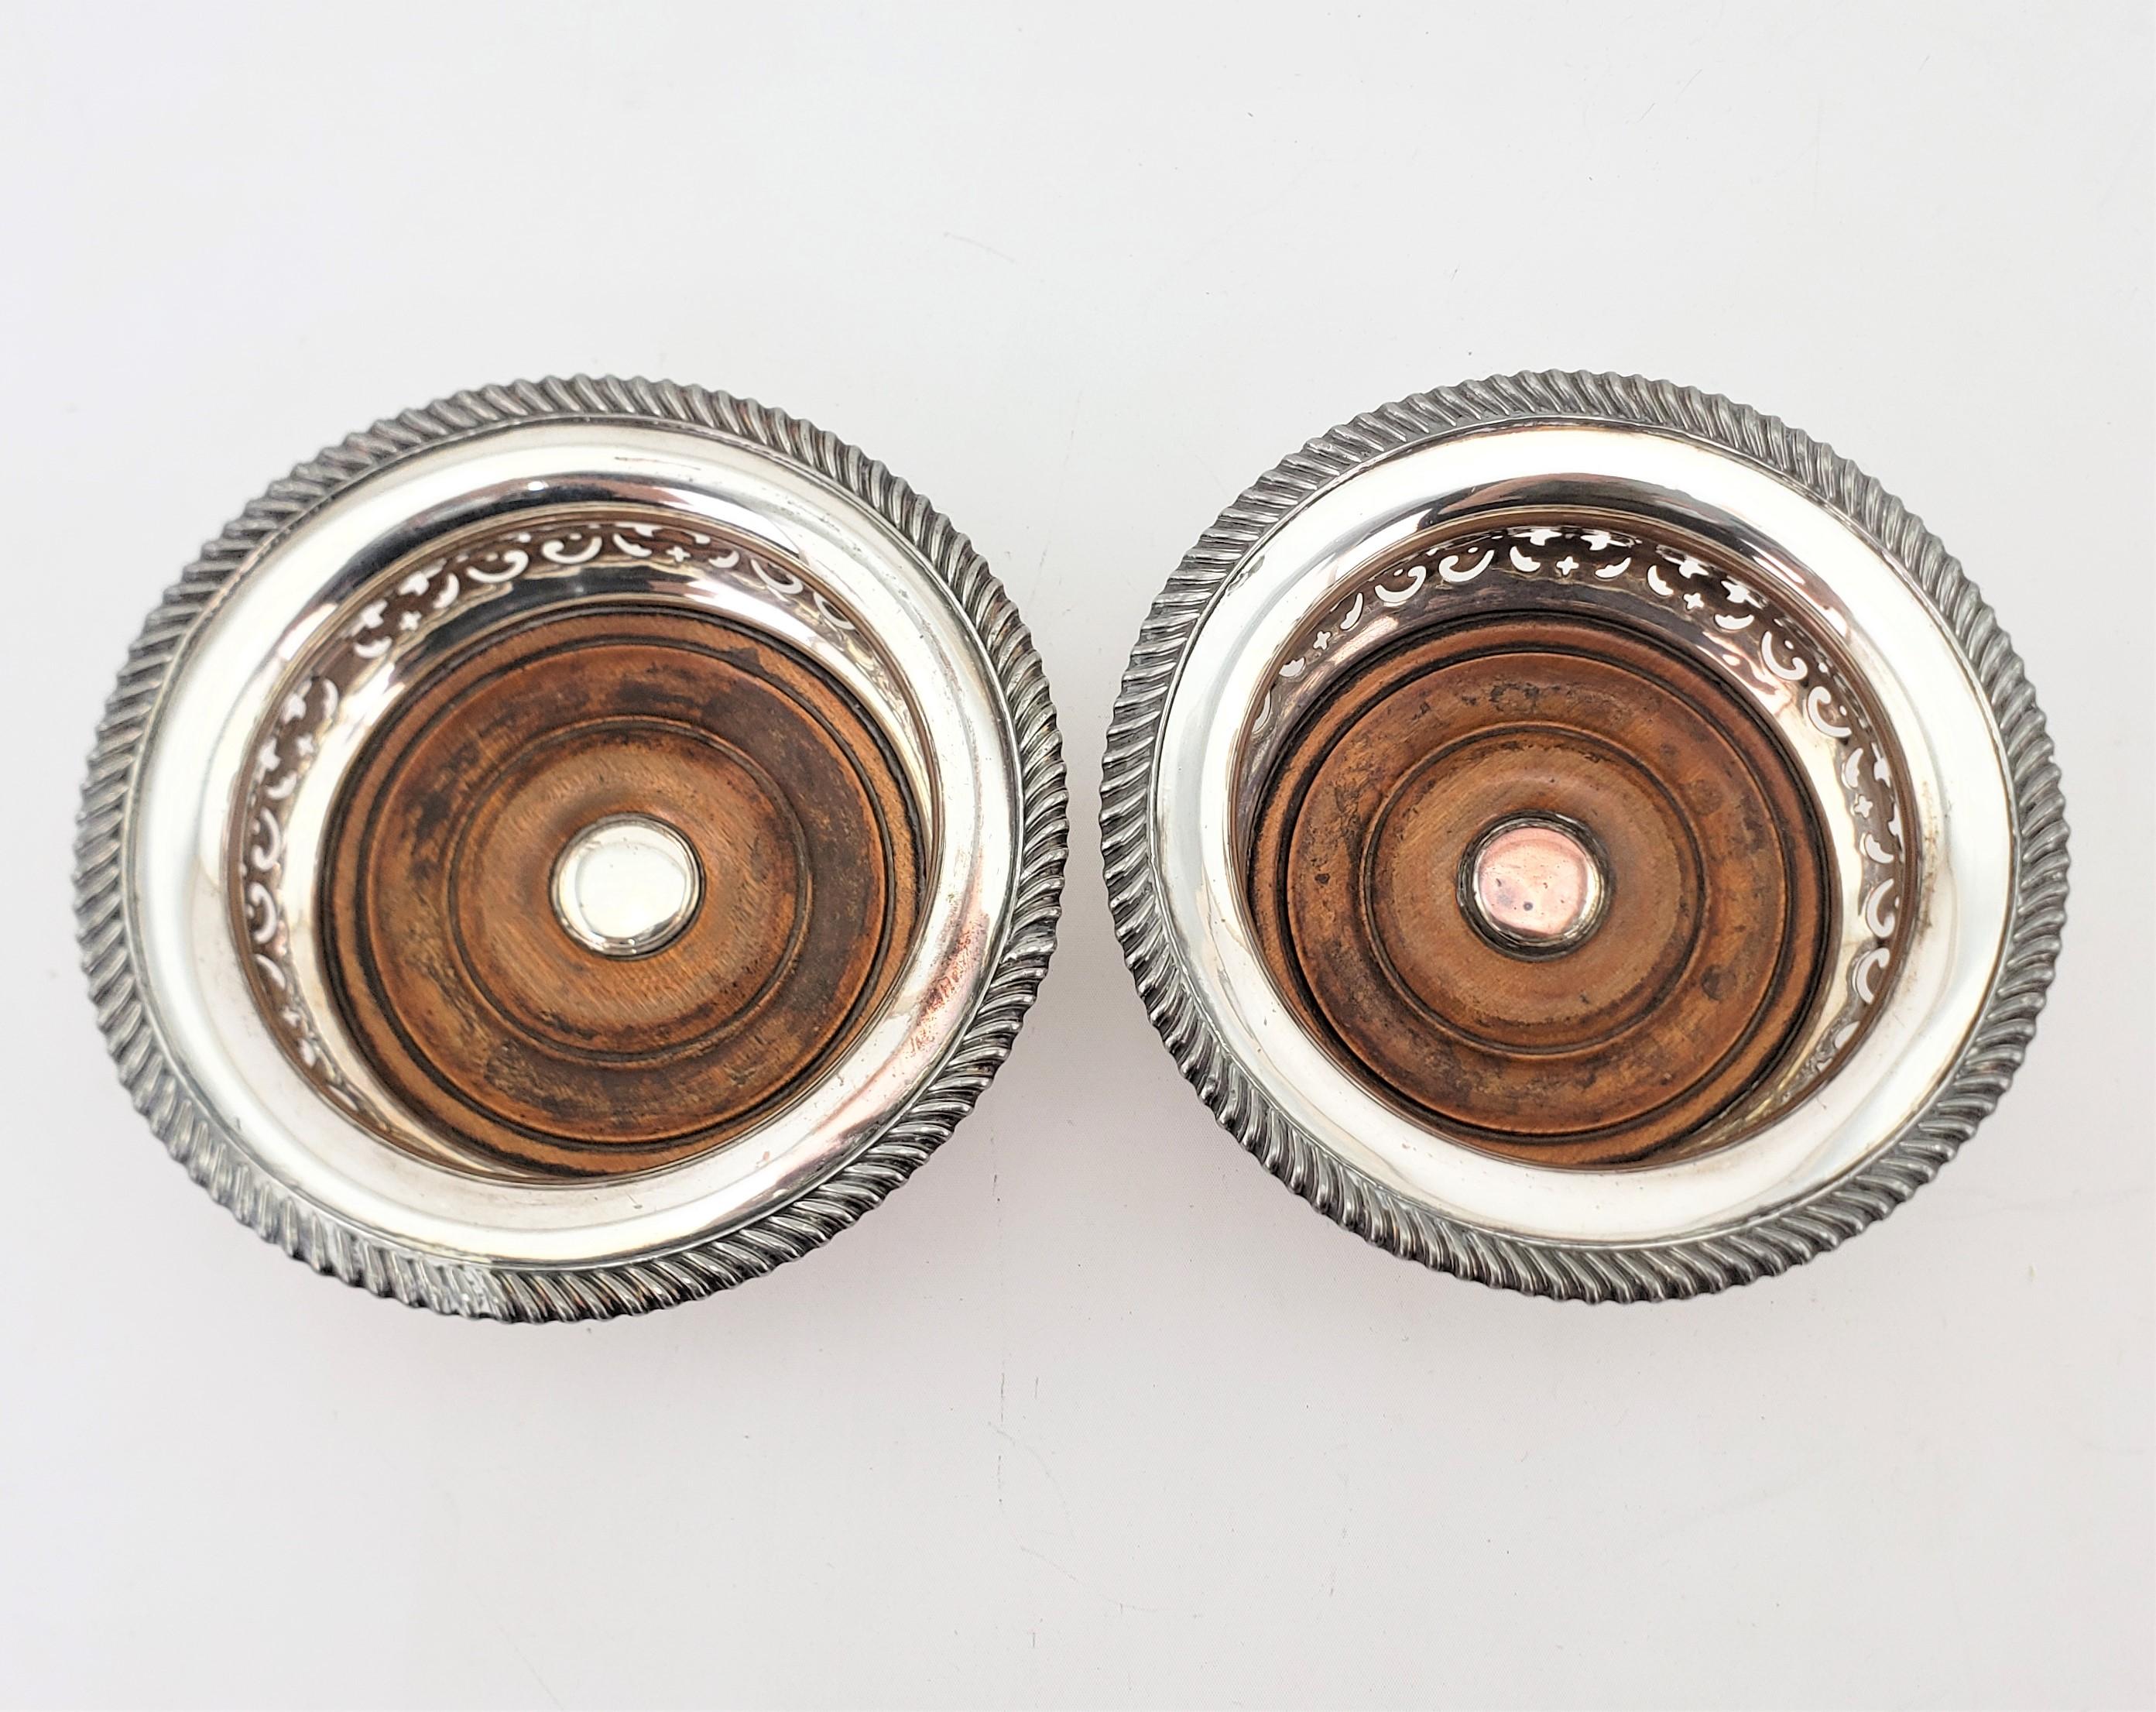 Machine-Made Pair of Large Antique Silver Plated Wine Bottle Coasters with Wooden Inserts